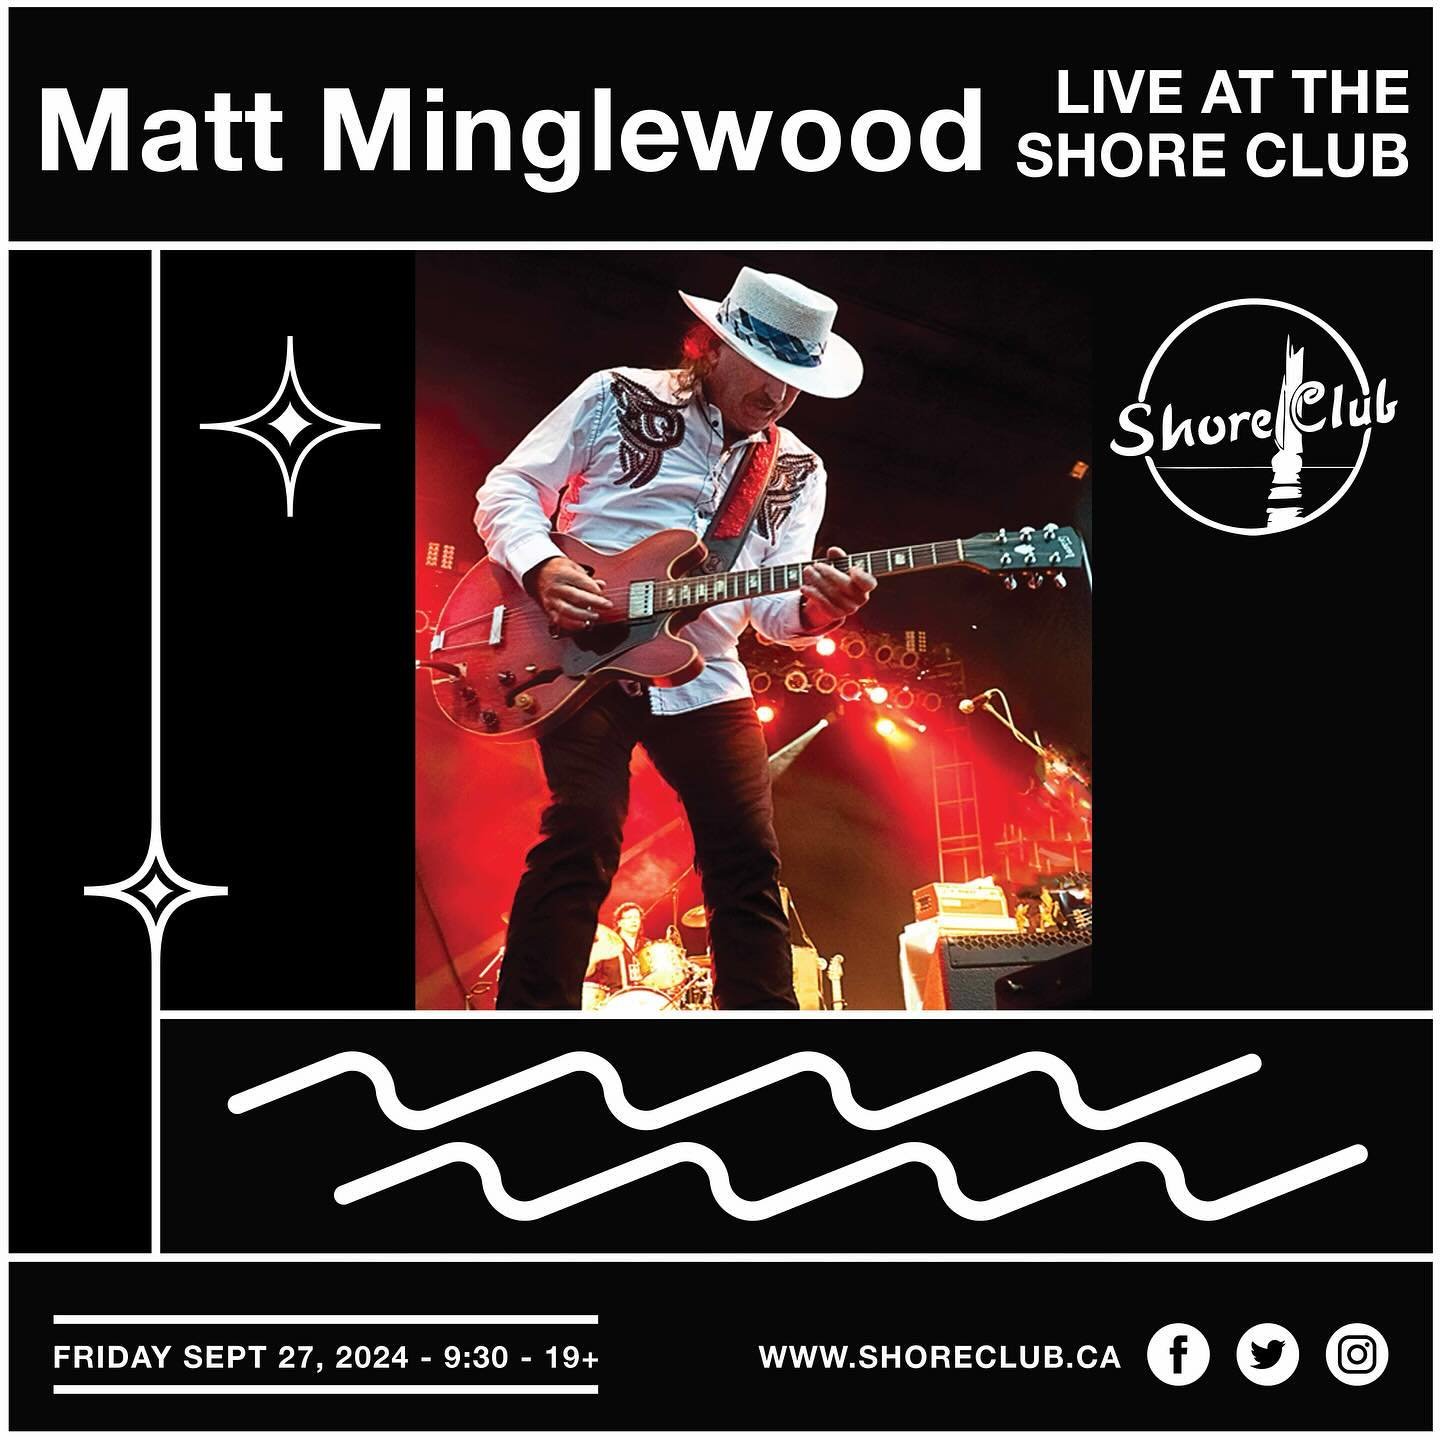 As long as he will be raunching we will be rolling! Minglewood is back for an unprecedented 56th year in a row! Get your tickets to see the legend in action at the Shore Club, what a treat!
.
Tickets on sale now - shoreclub.ca 
Show - Friday Sept 27 